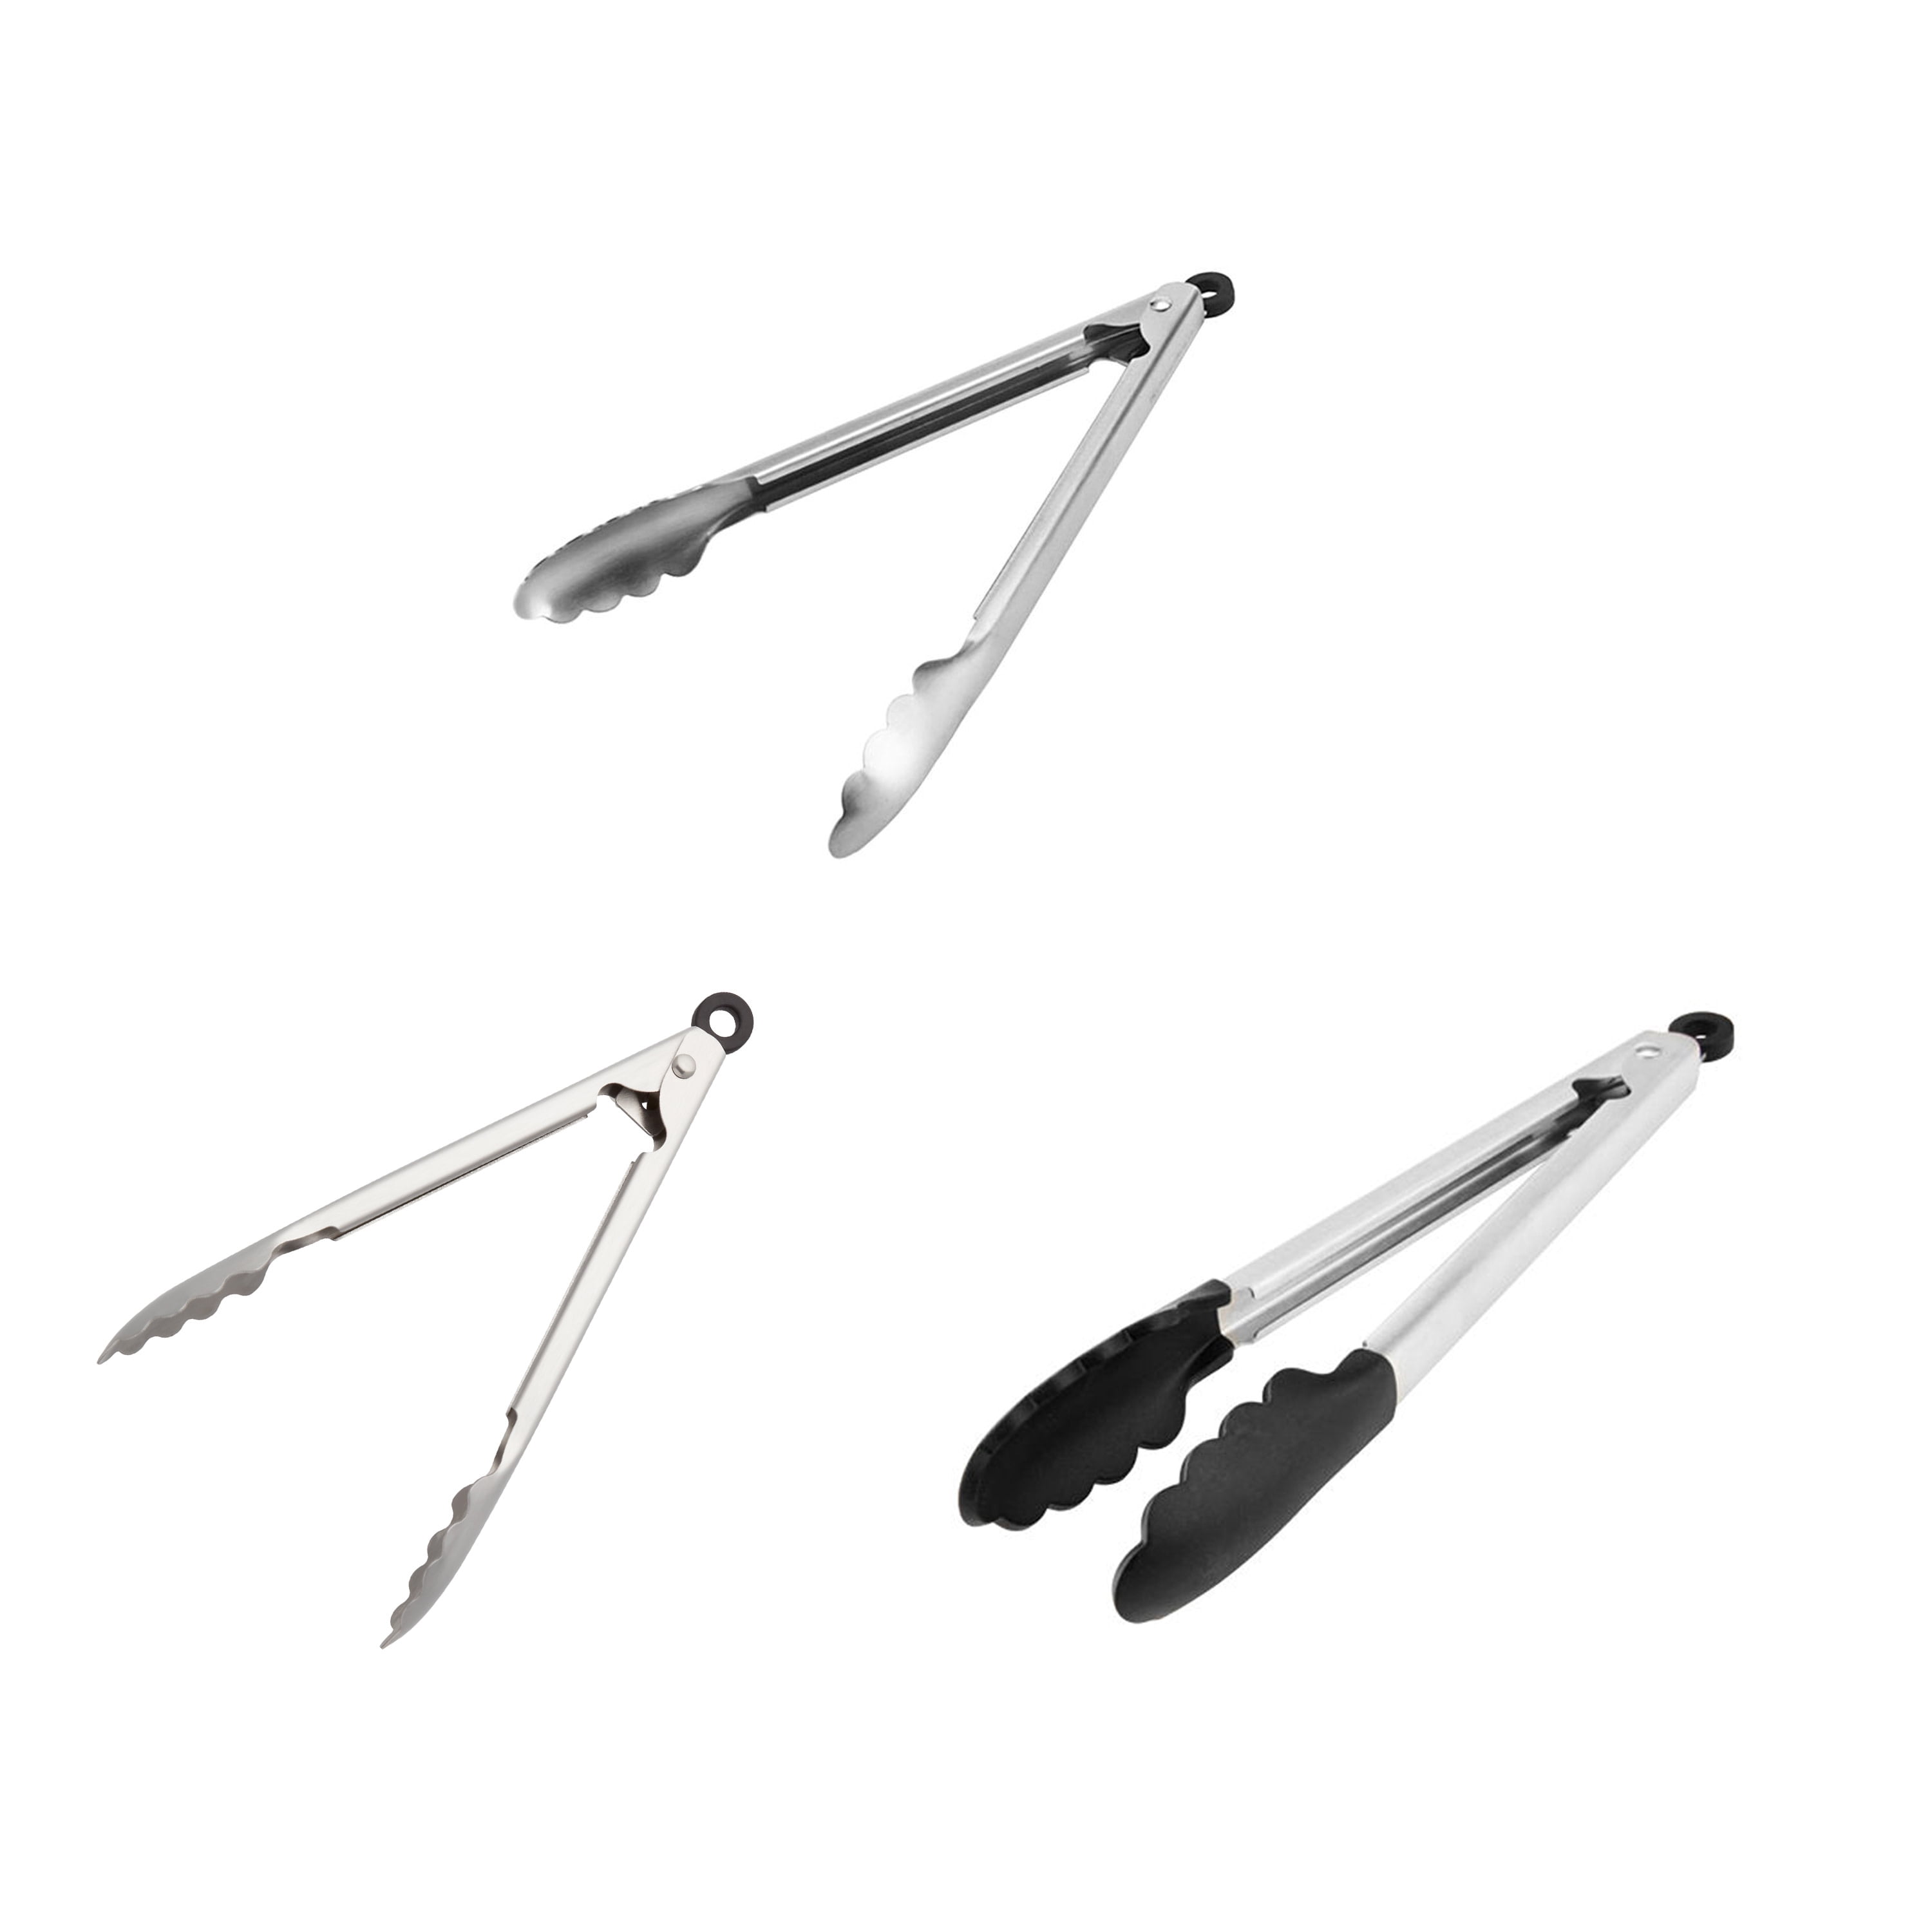 Classic Cuisine 3-piece Stainless Steel Kitchen Tongs - 8683387